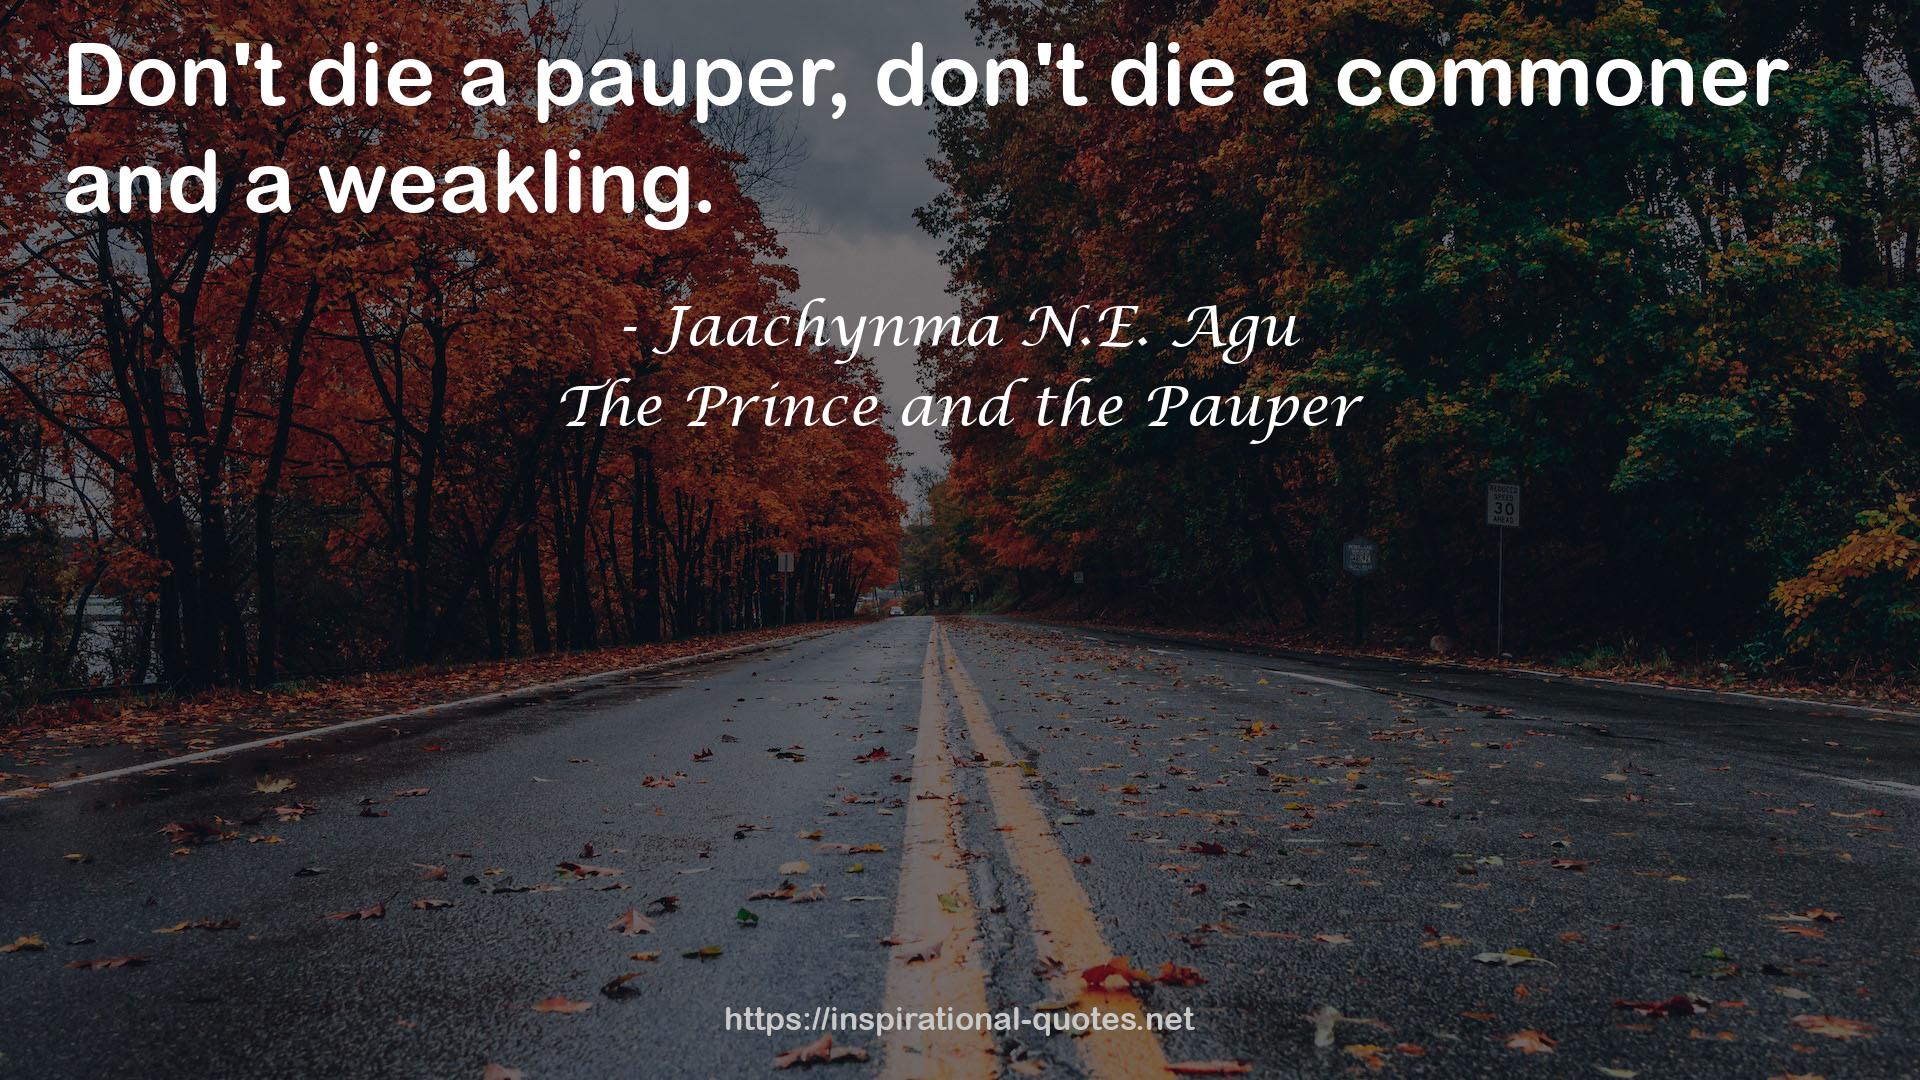 The Prince and the Pauper QUOTES